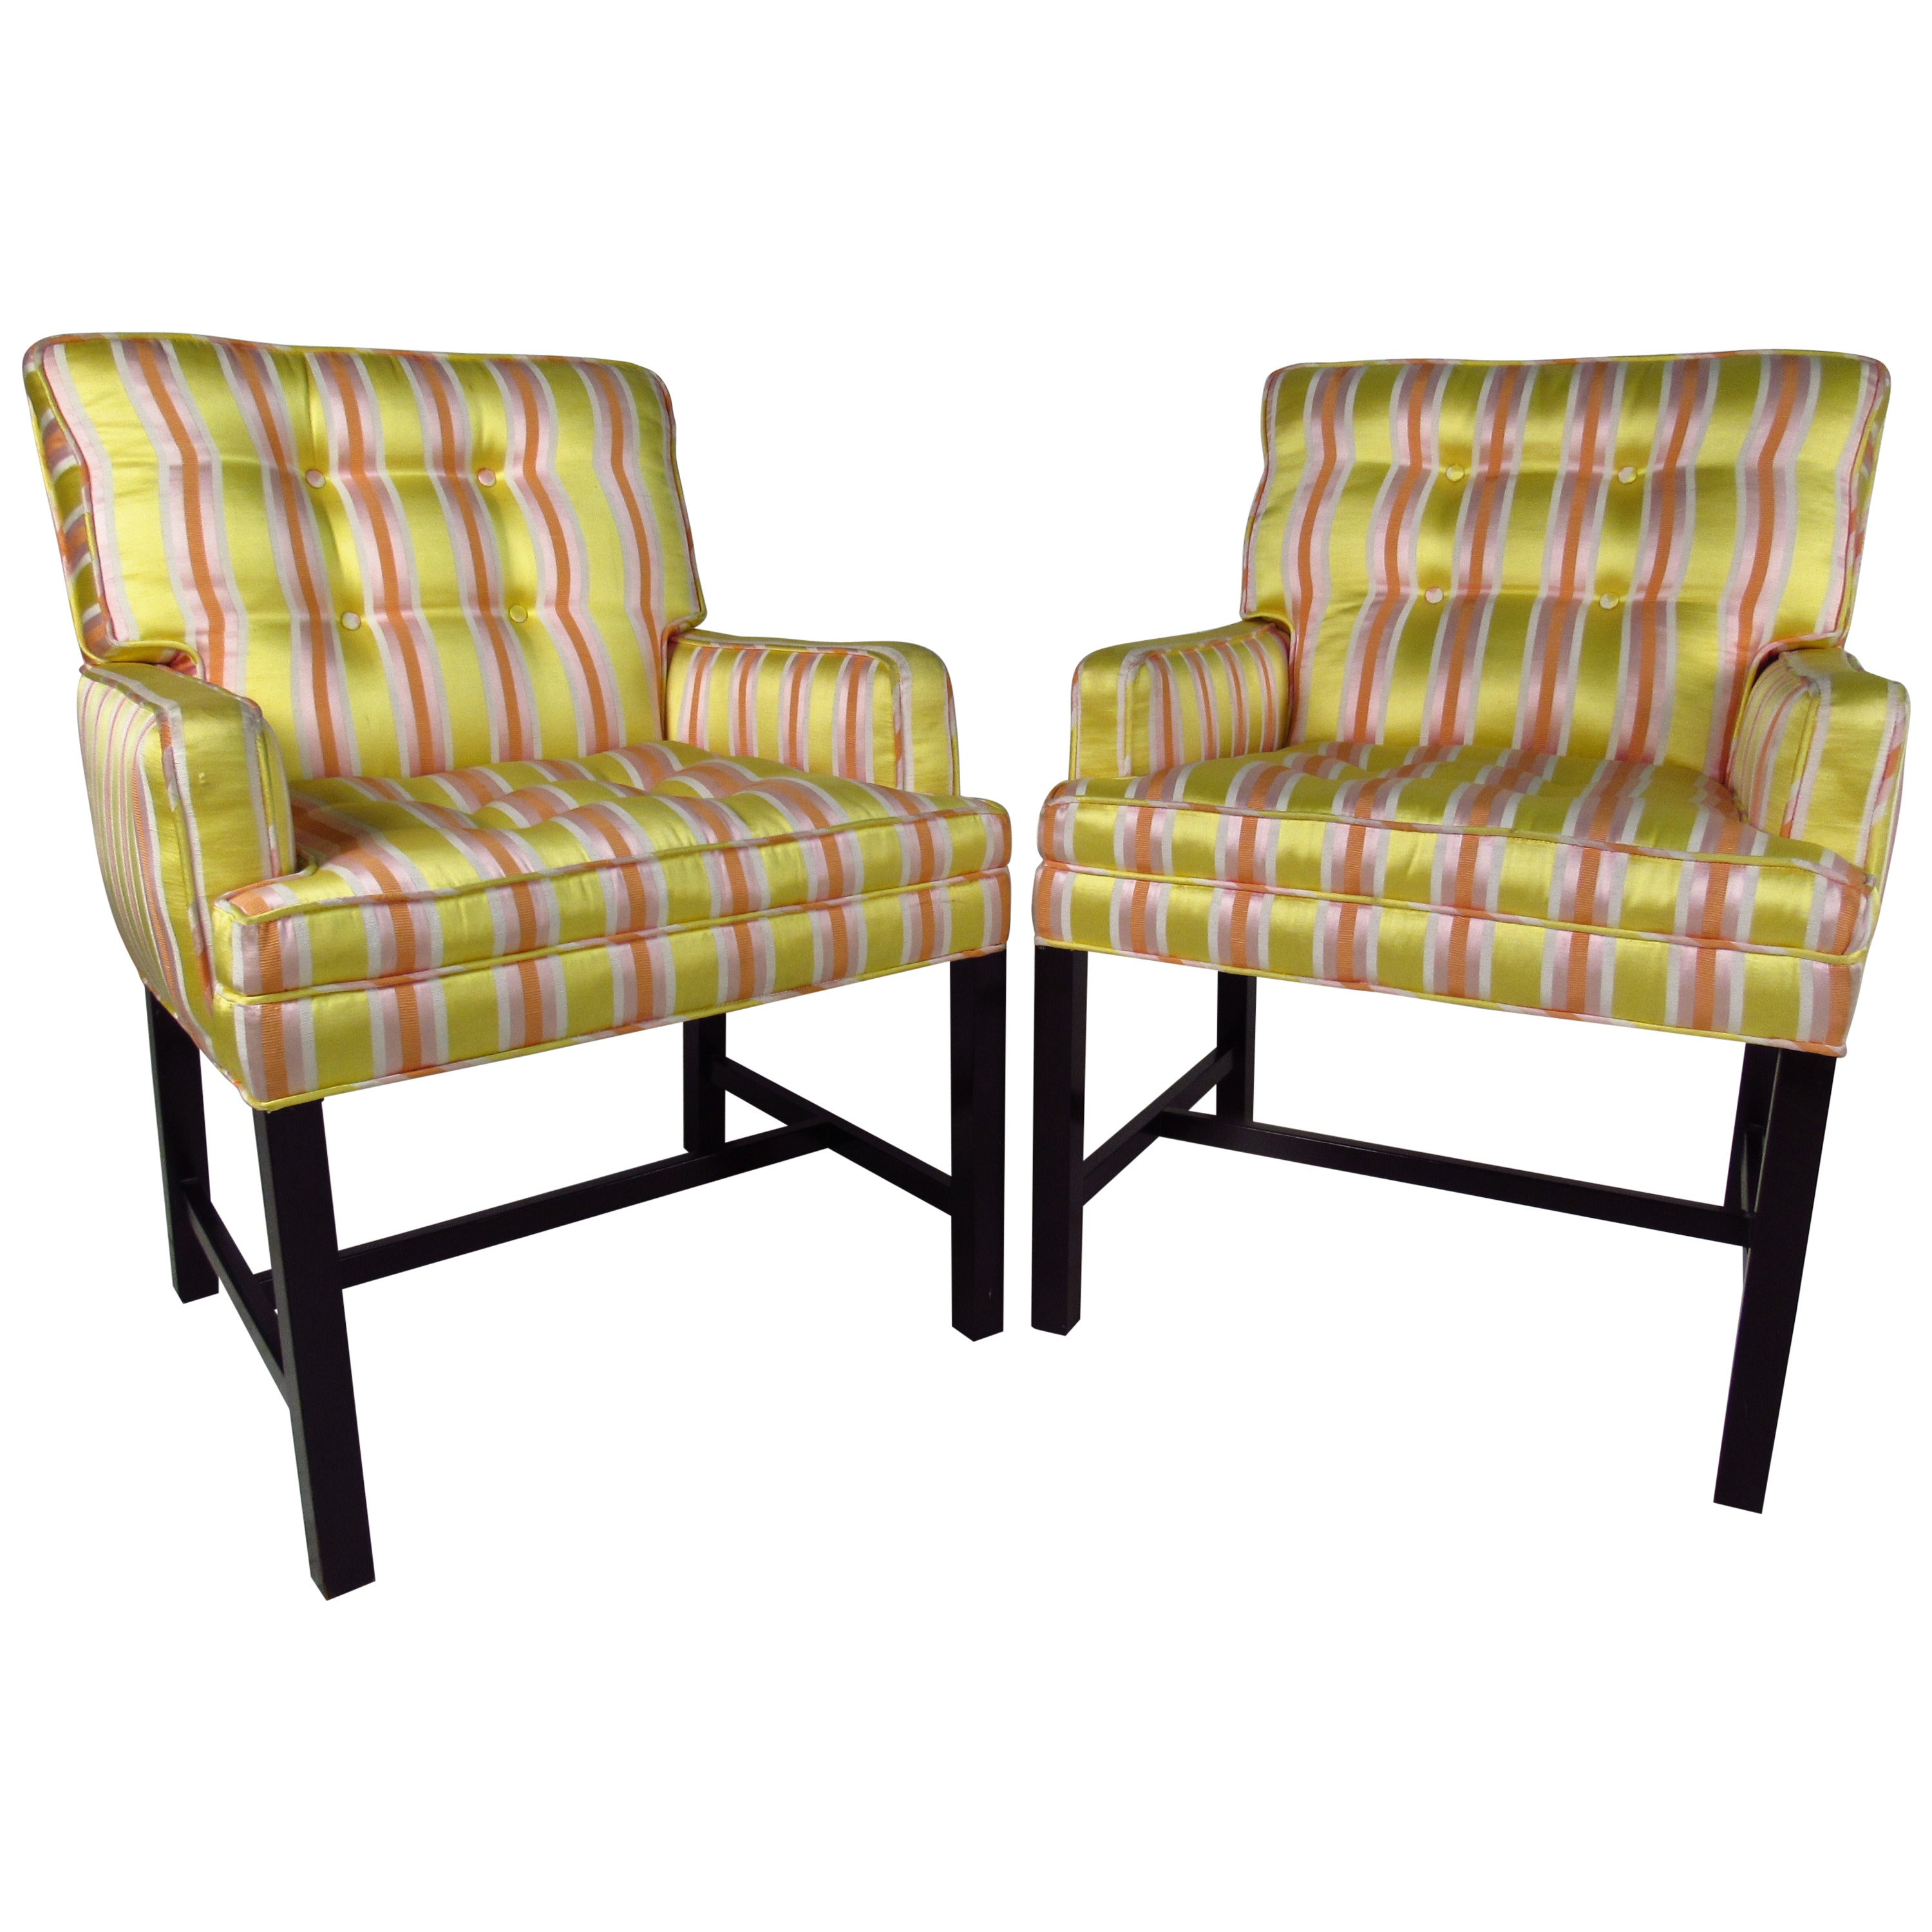 Pair of Vintage Modern Side Chairs after Dunbar